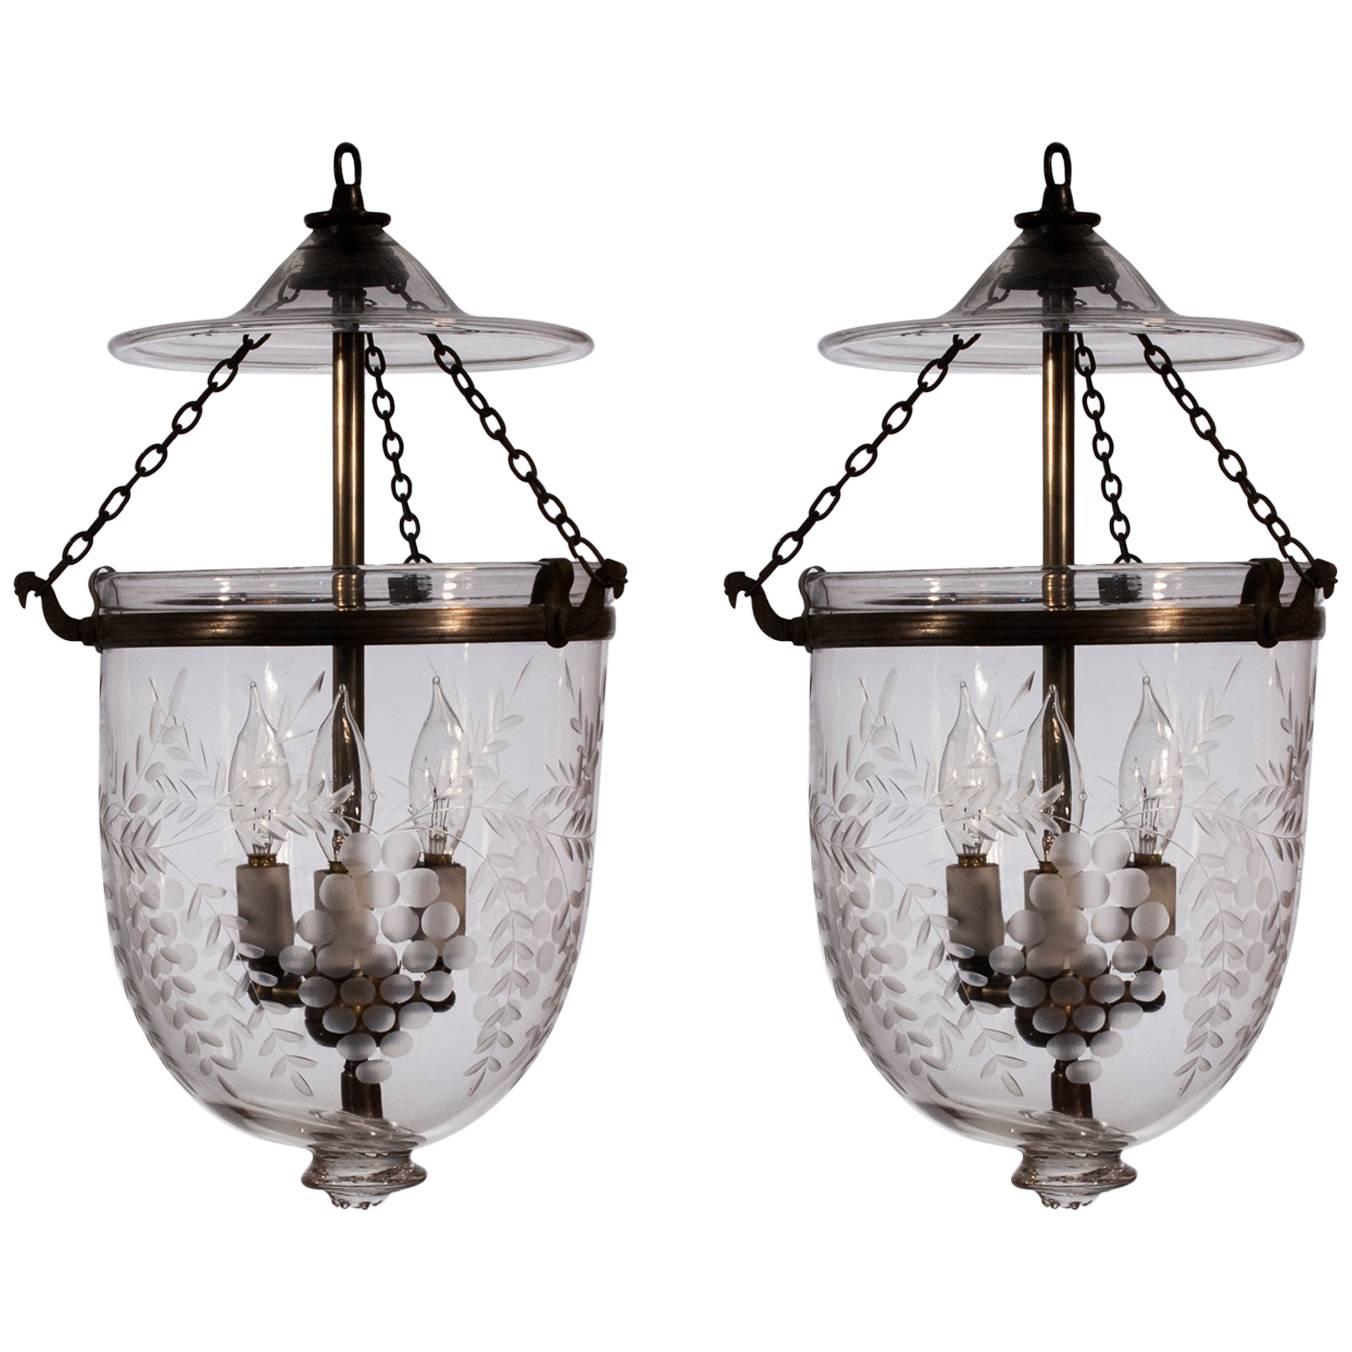 Pair of 19th Century Bell Jar Lanterns with Grape and Vine Etching